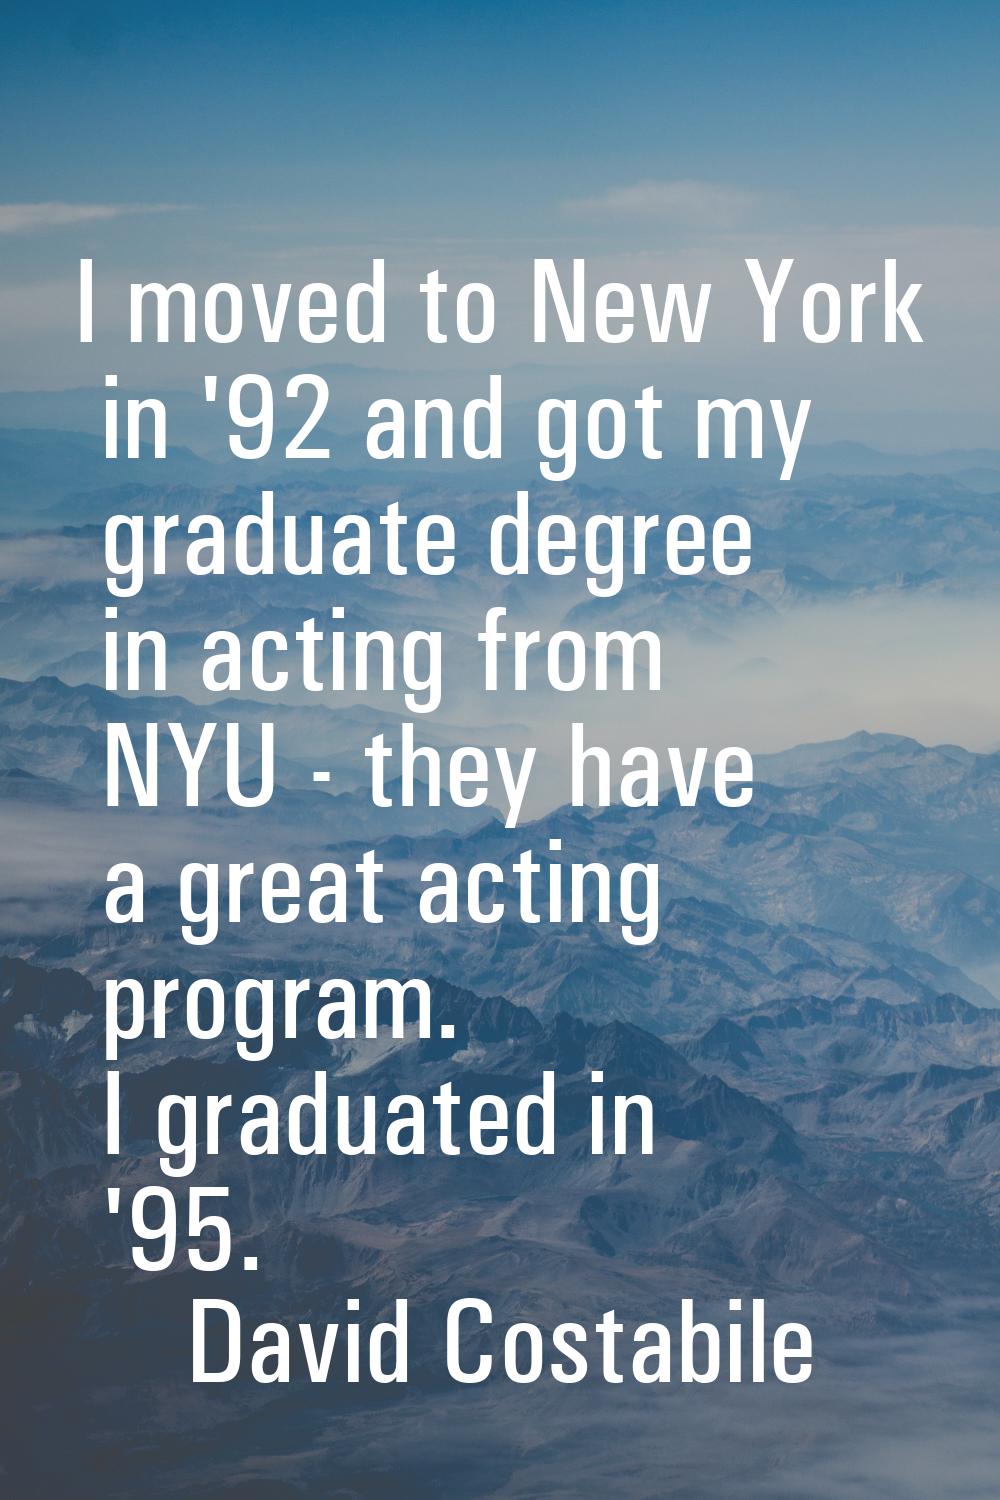 I moved to New York in '92 and got my graduate degree in acting from NYU - they have a great acting